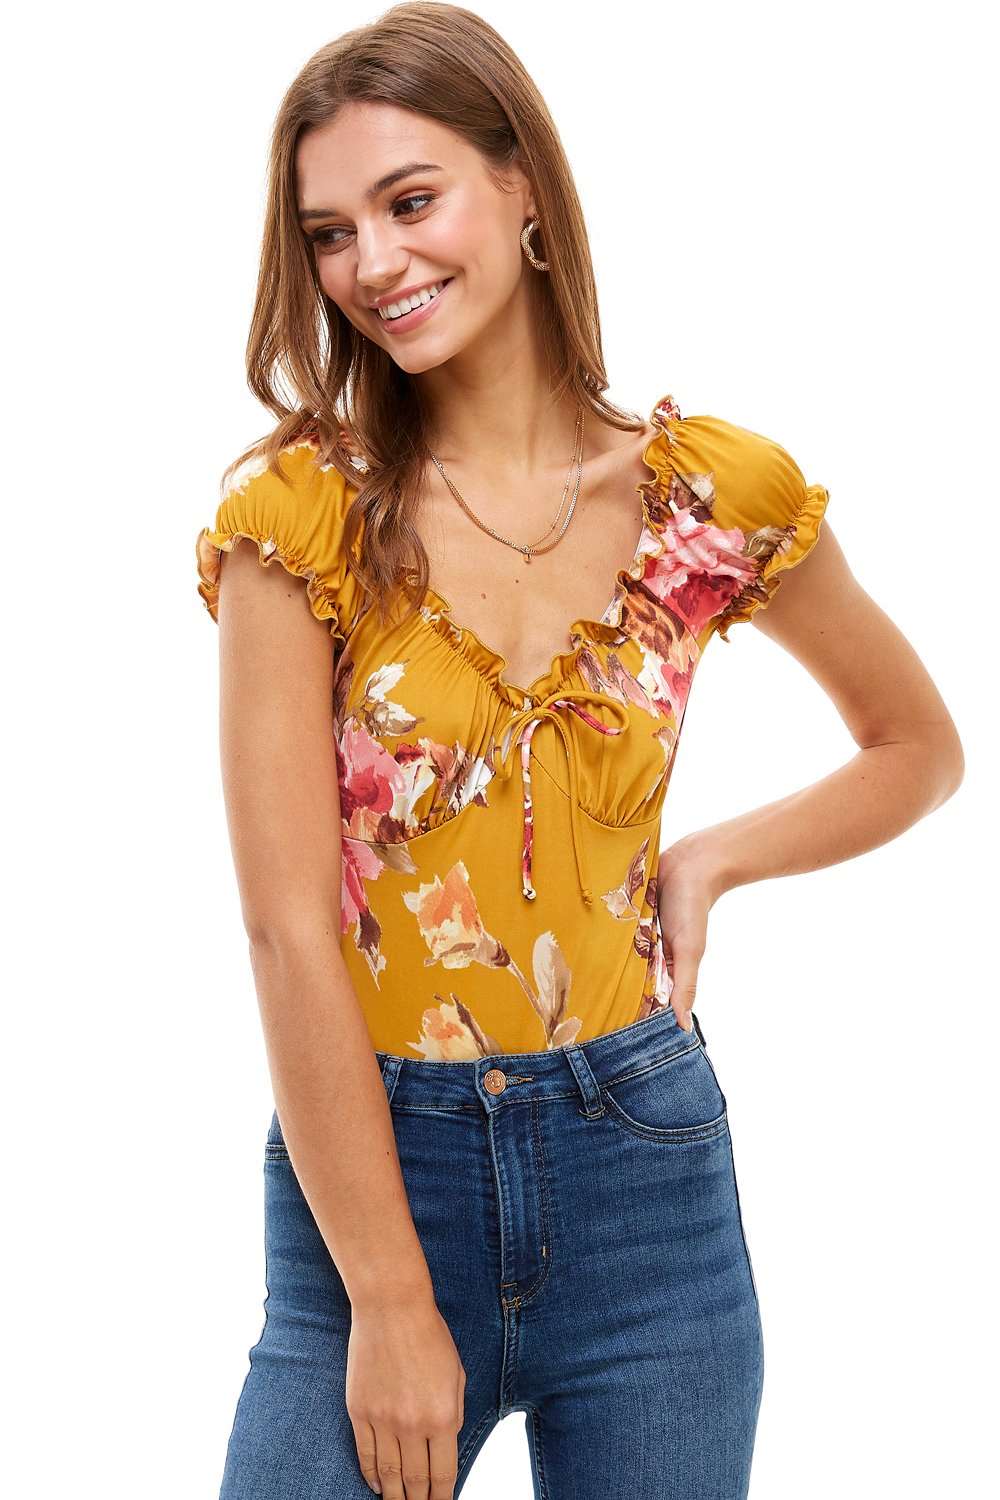 Nfin8 Blossom Chic Floral Printed Bodysuit